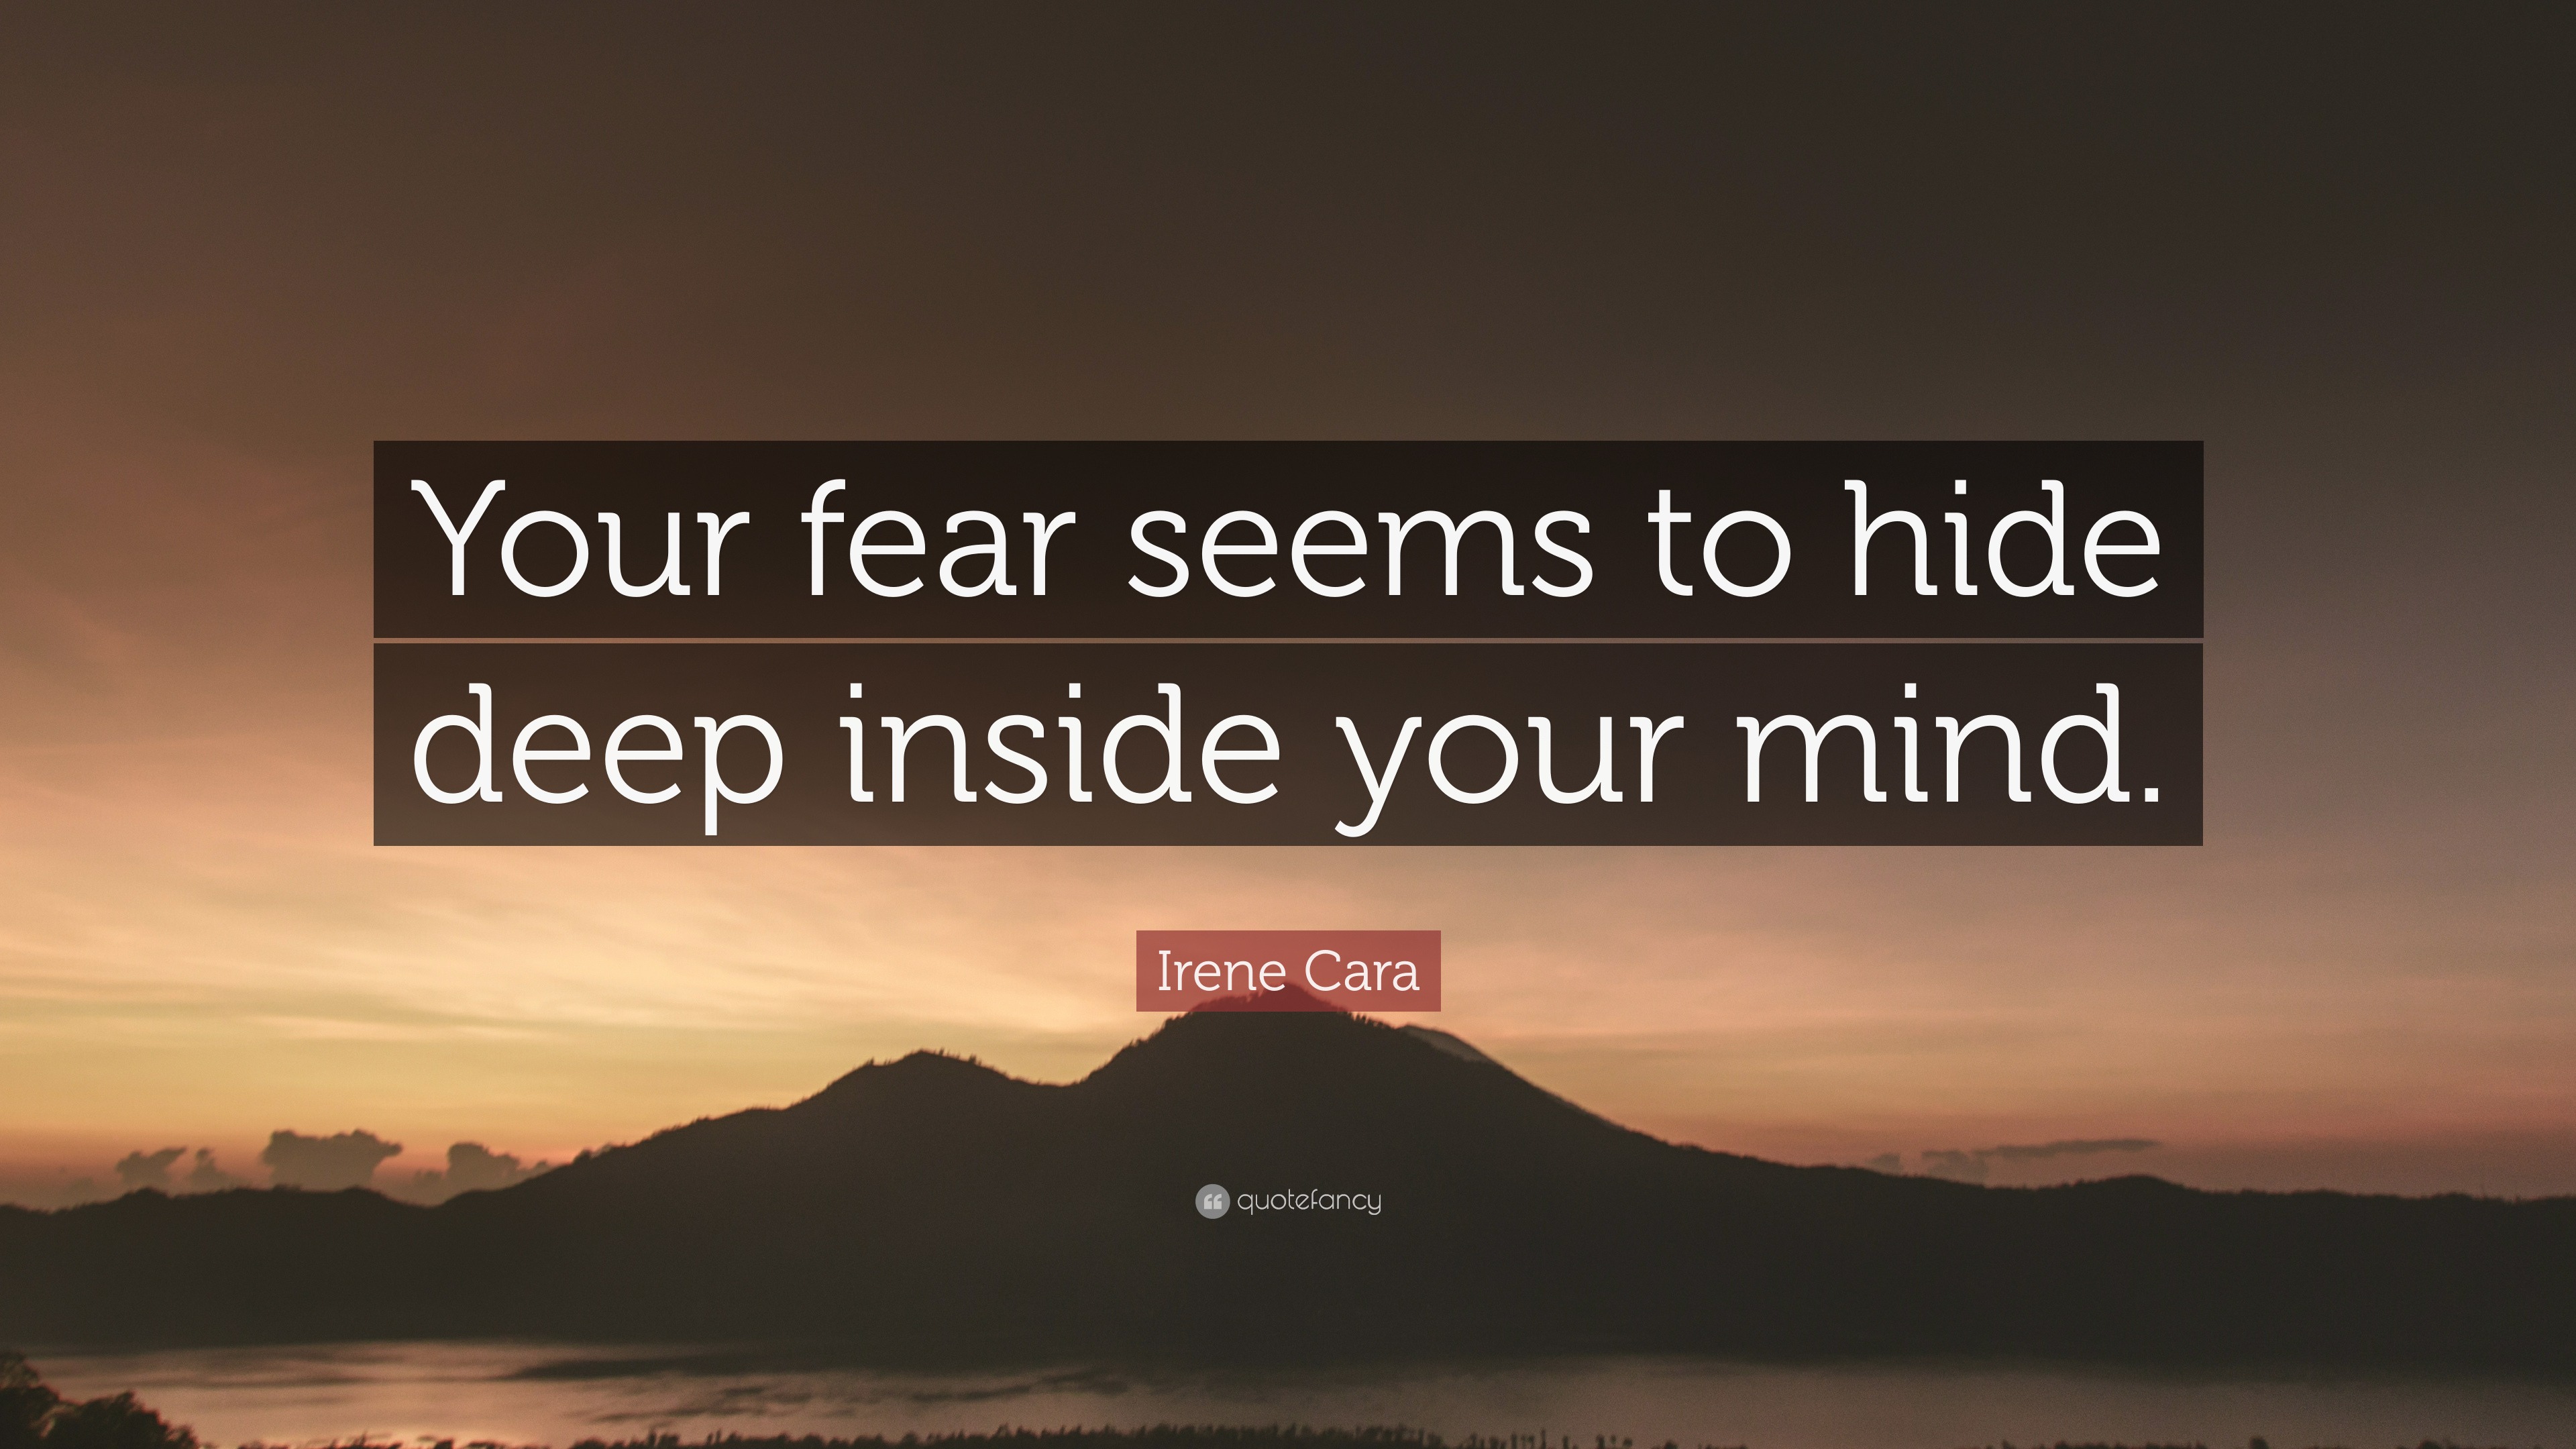 Irene Cara Quote Your Fear Seems To Hide Deep Inside Your Mind 7 Wallpapers Quotefancy